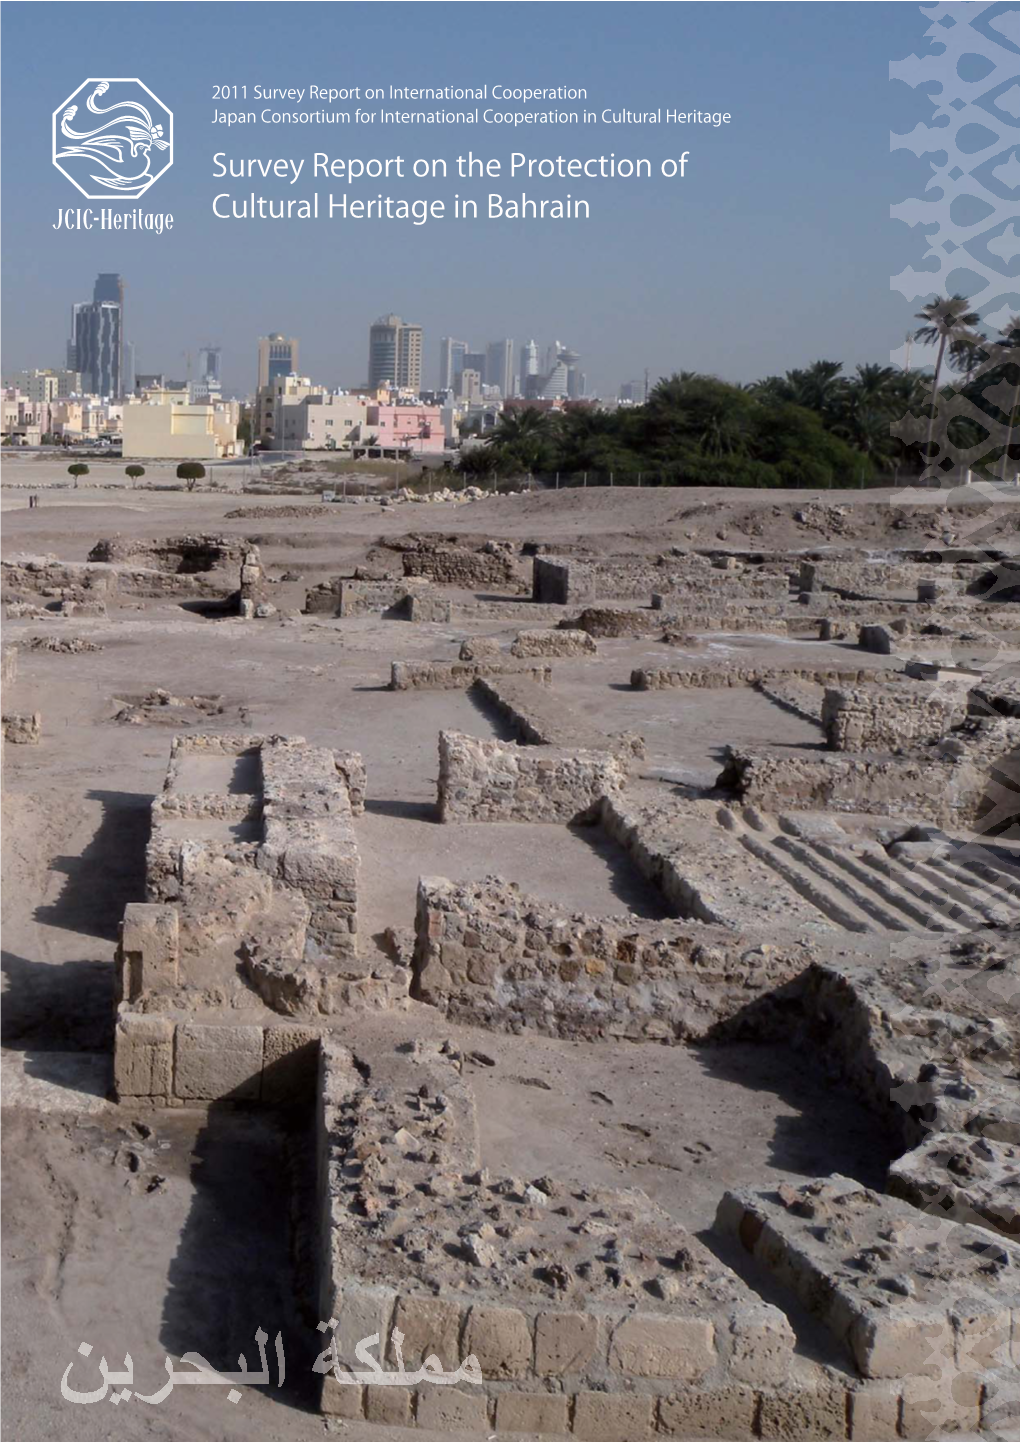 Survey Report on the Protection of Cultural Heritage in Bahrain